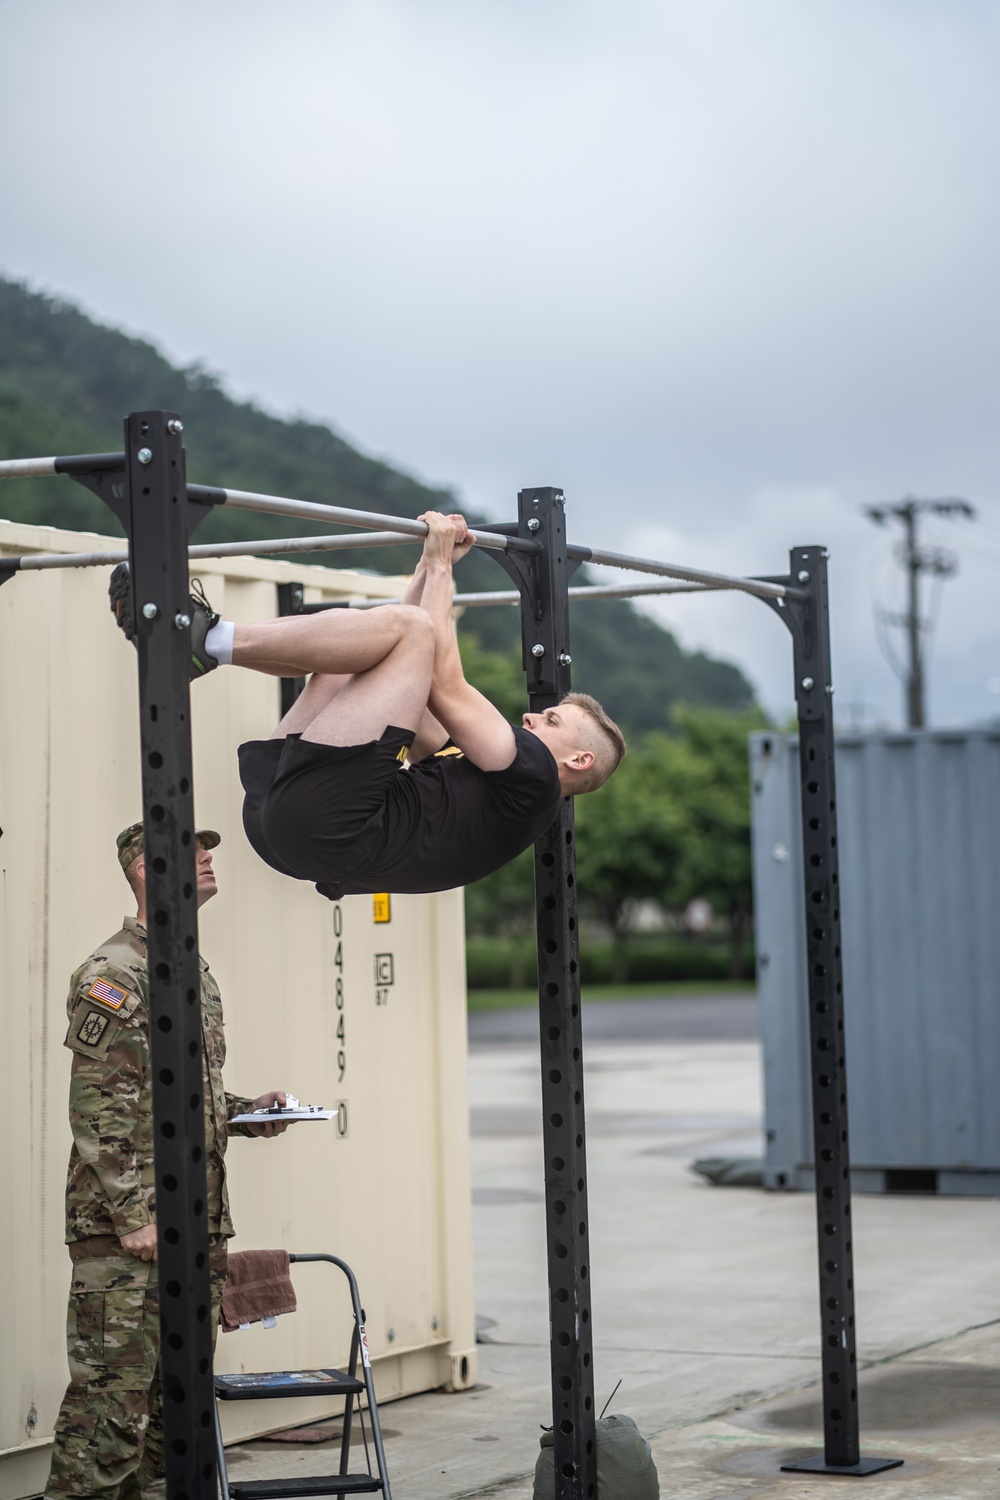 USARPAC BWC 2021: South Korea, Eighth Army, Sgt. Steven Levesque preforms the Leg Tuck exercise